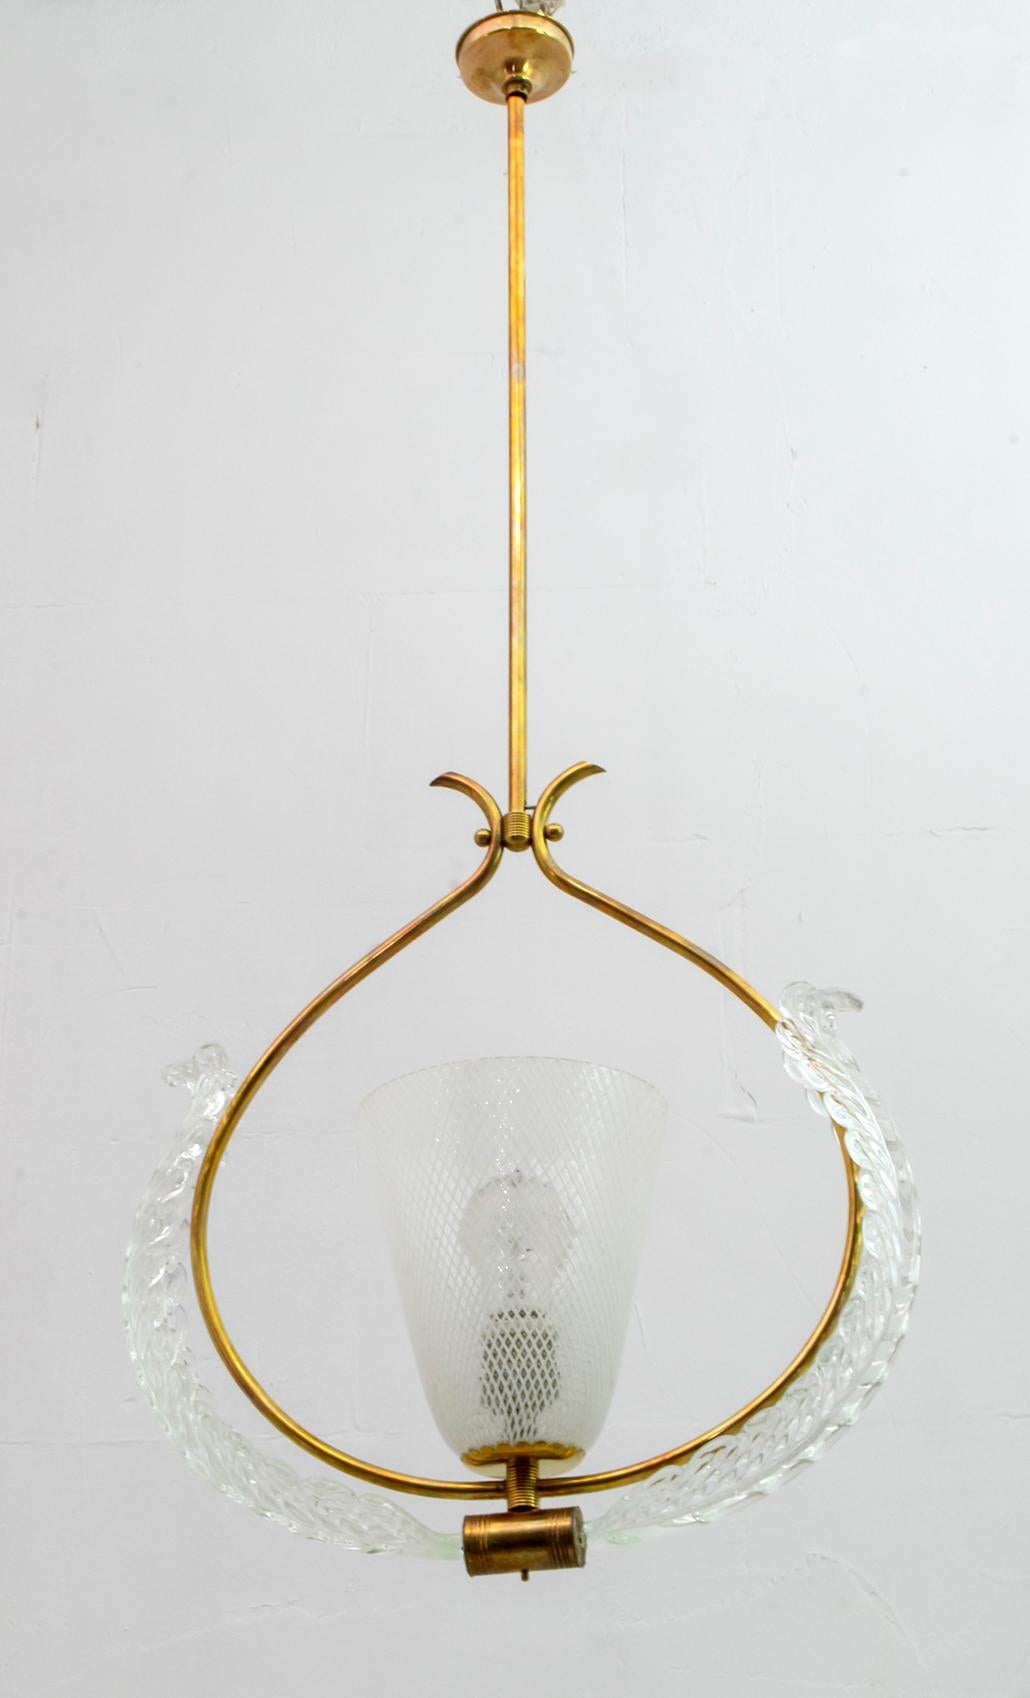 This pendant was designed and produced by Ercole Barovier in the 1940s, in Murano glass, the cup was made with the 